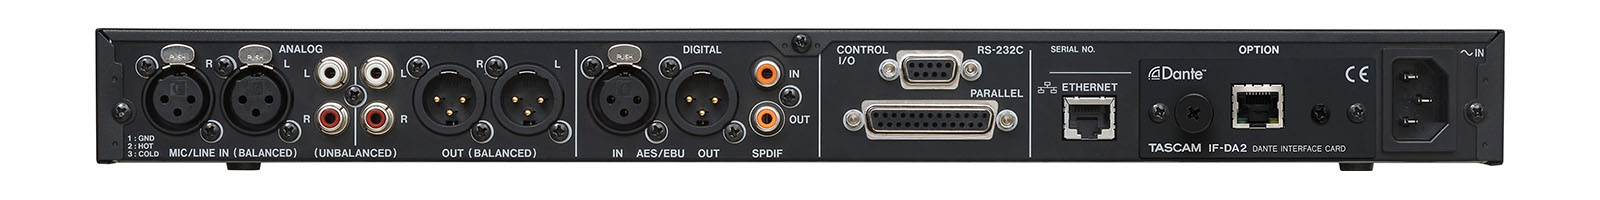 SS-CDR250N | OVERVIEW | TASCAM - United States